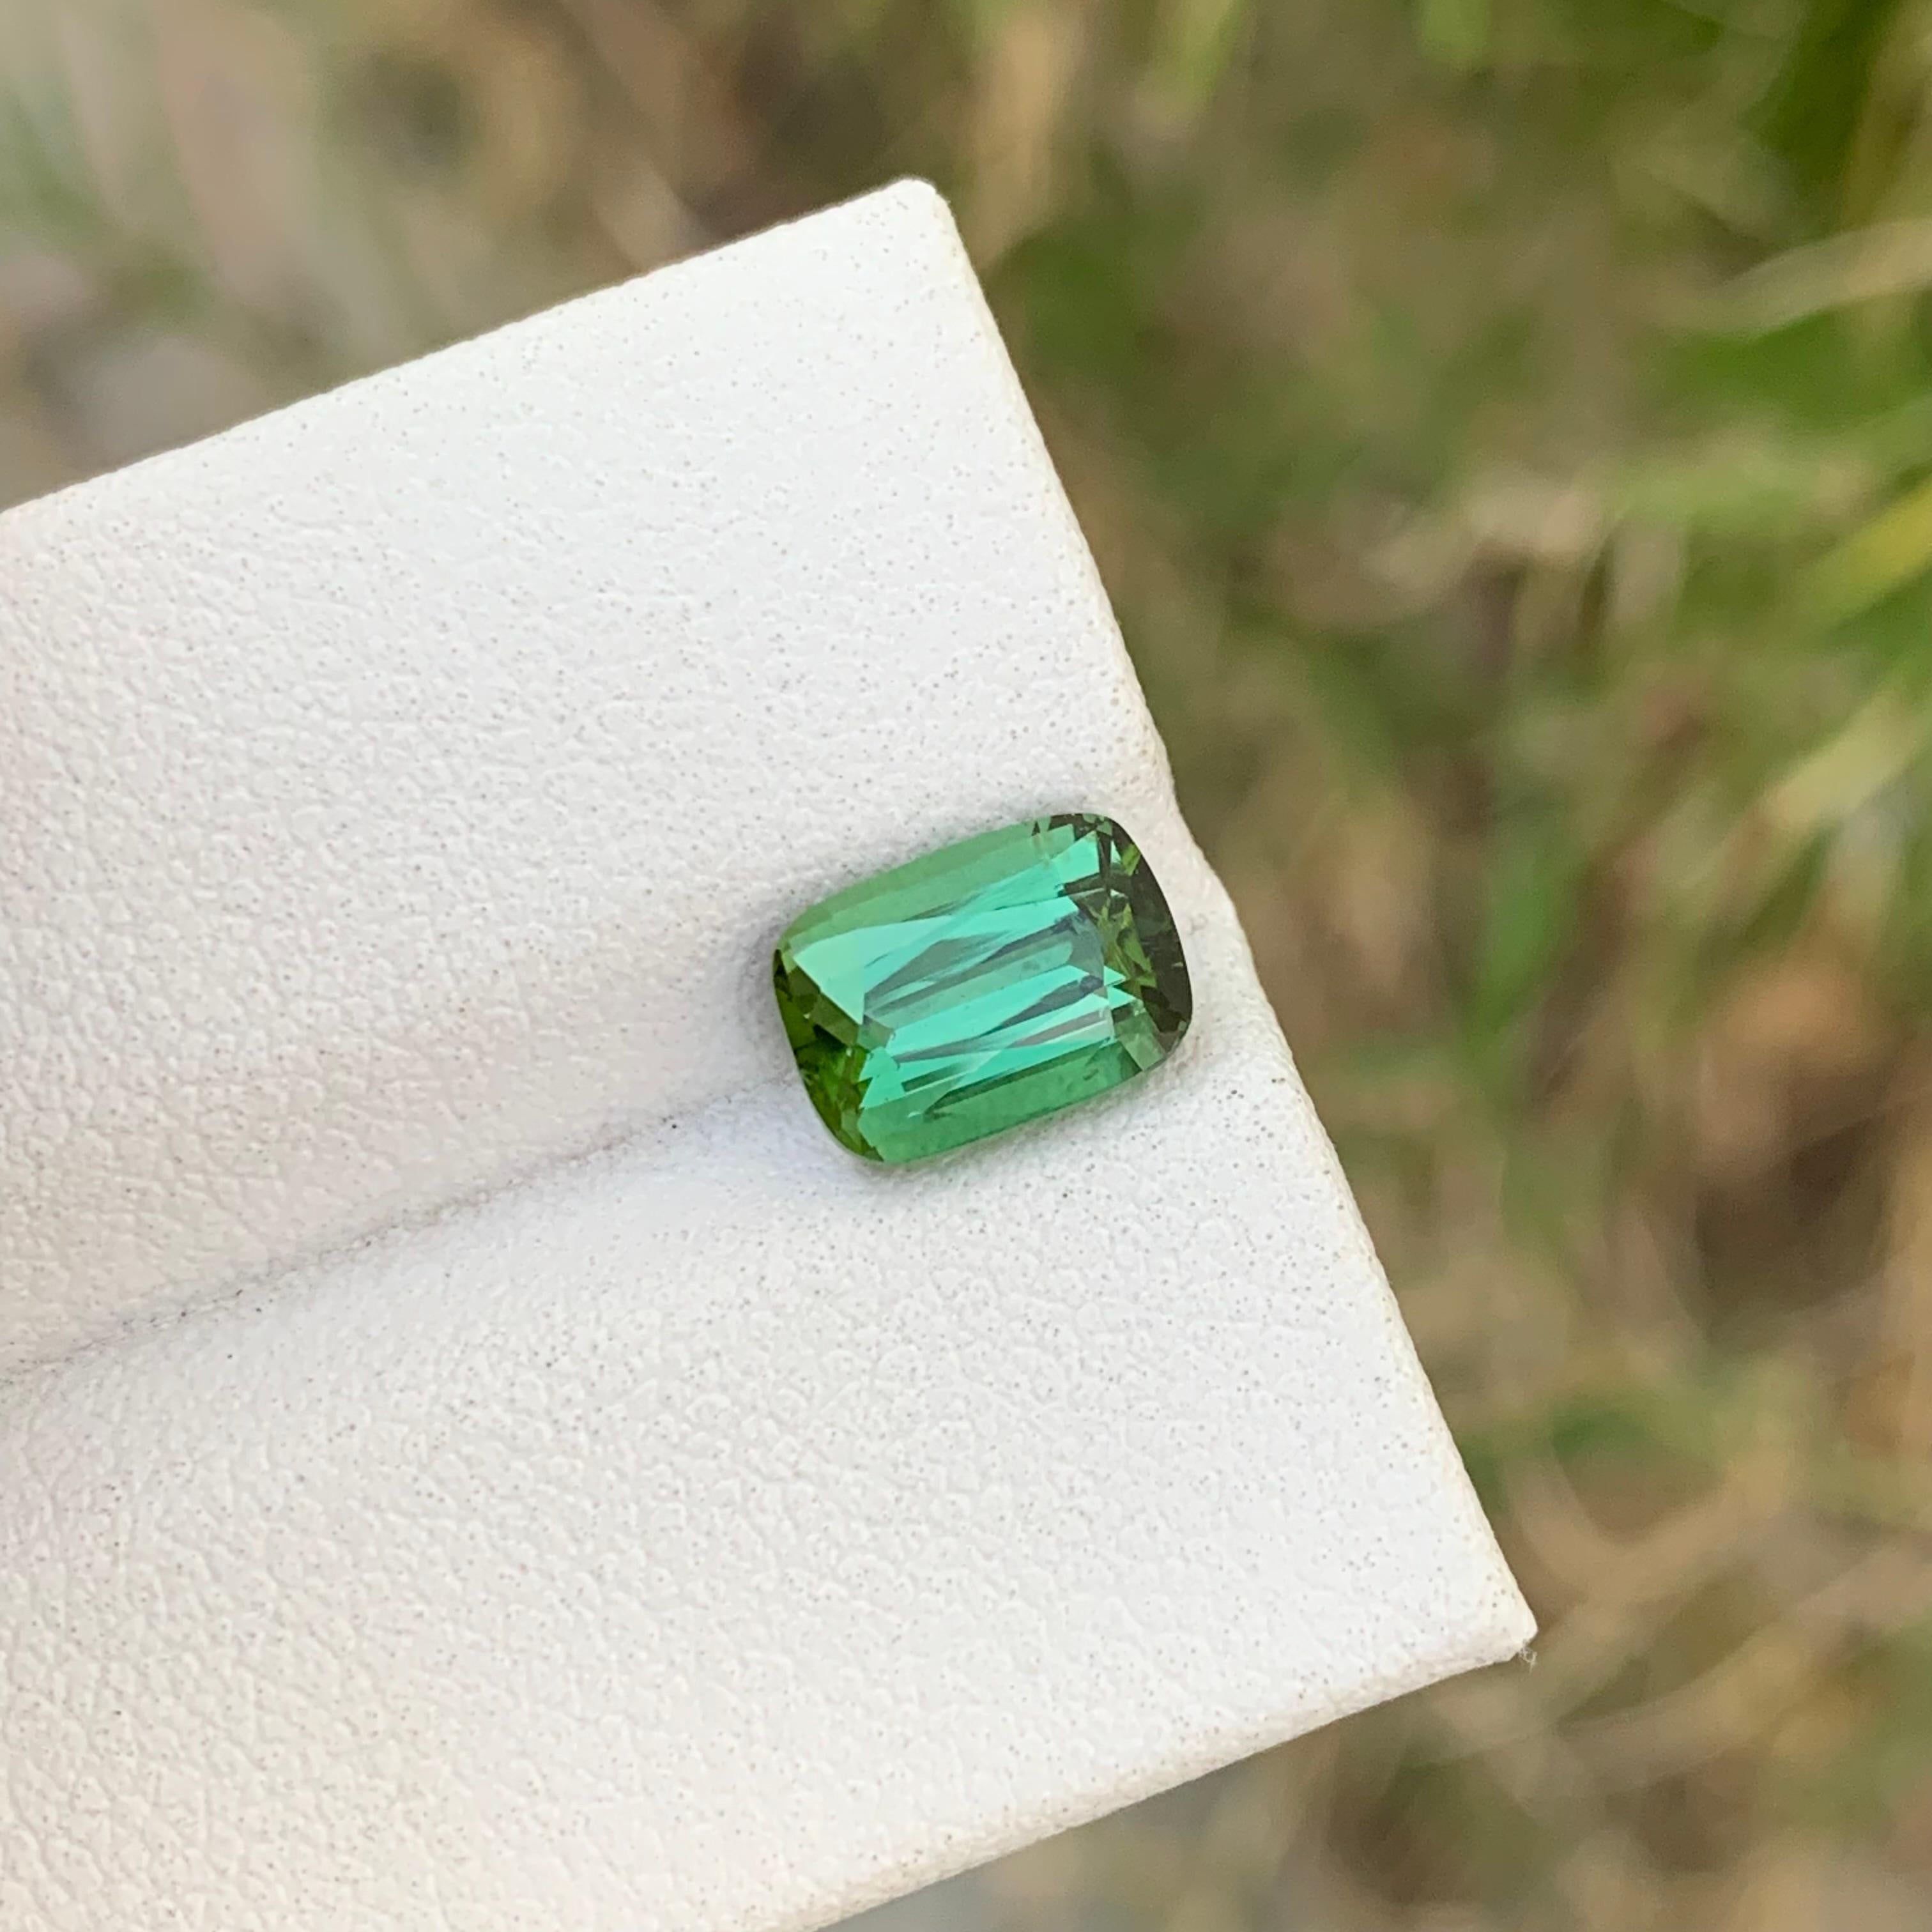 Loose Lagoon Tourmaline
Weight: 1.85 Carats
Dimension: 8.1 x 5.8 x 4.8 Mm
Colour: Lagoon
Origin: Afghanistan
Certificate: On Demand
Treatment: Non

Tourmaline is a captivating gemstone known for its remarkable variety of colors, making it a favorite